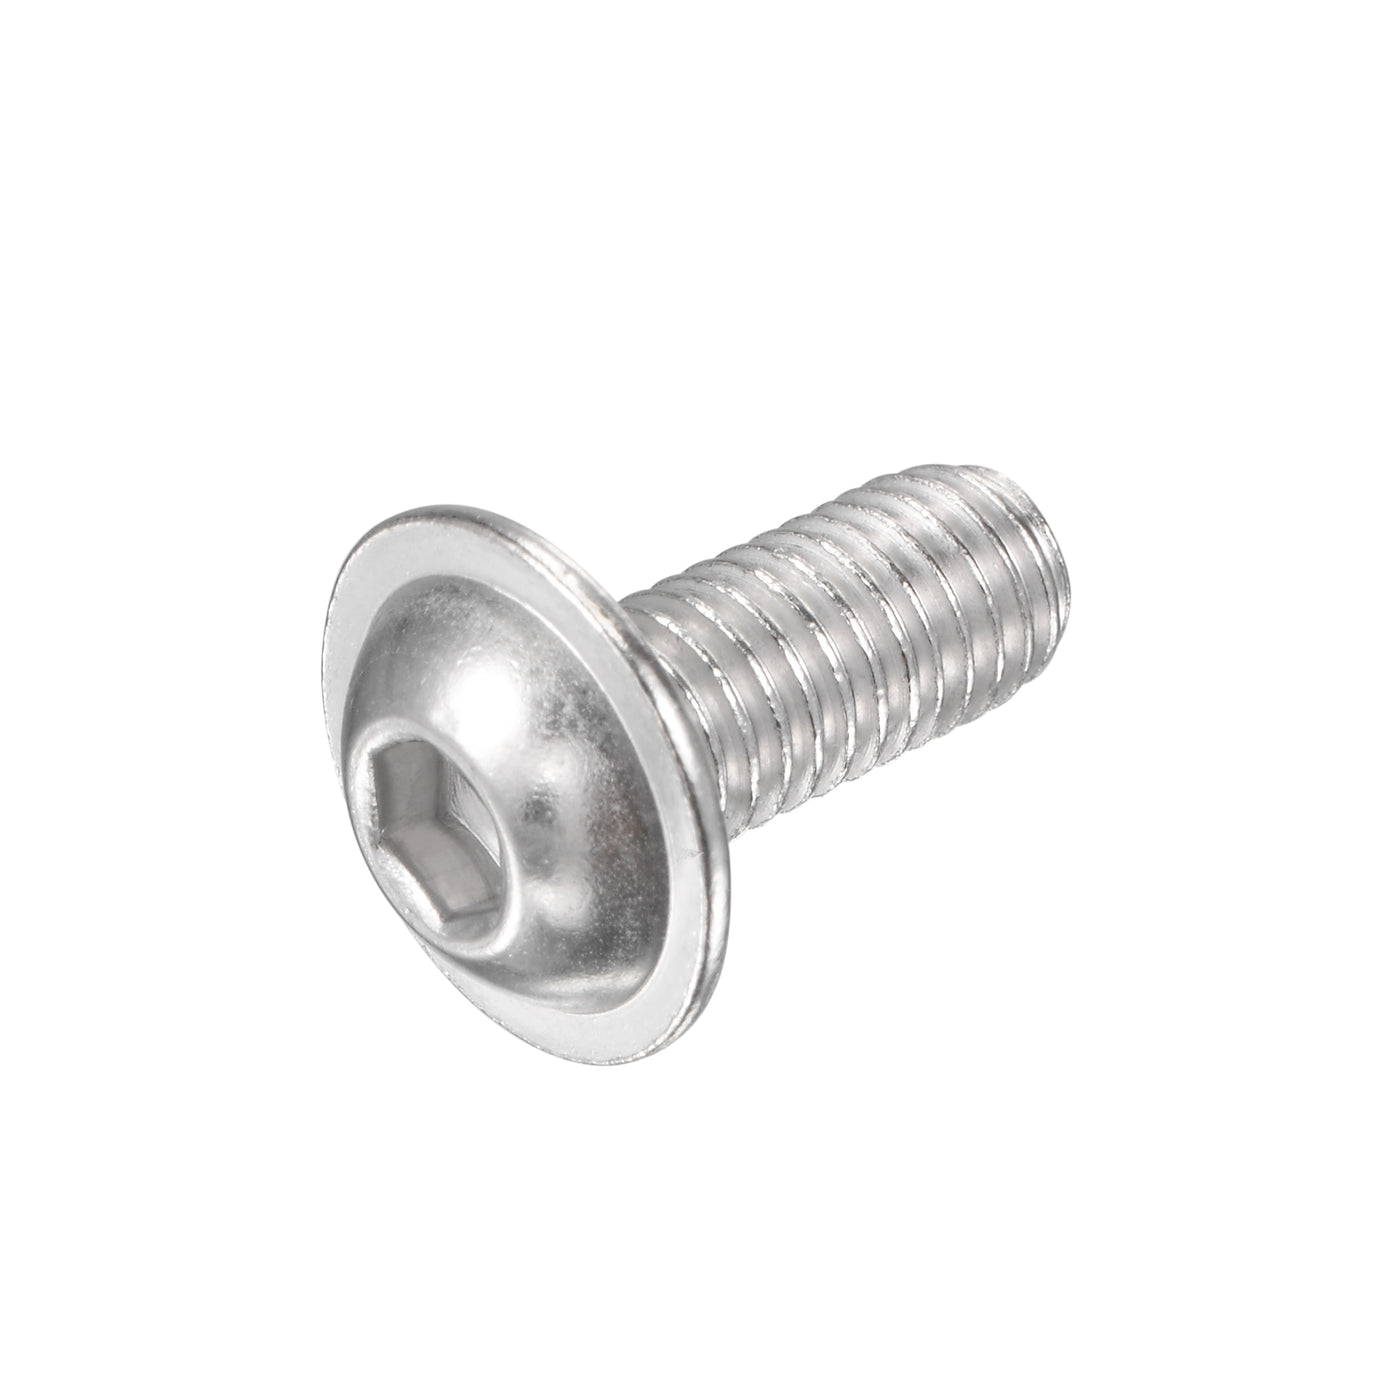 Uxcell Uxcell M8x16mm 304 Stainless Steel Flanged Button Head Socket Cap Screws 20pcs